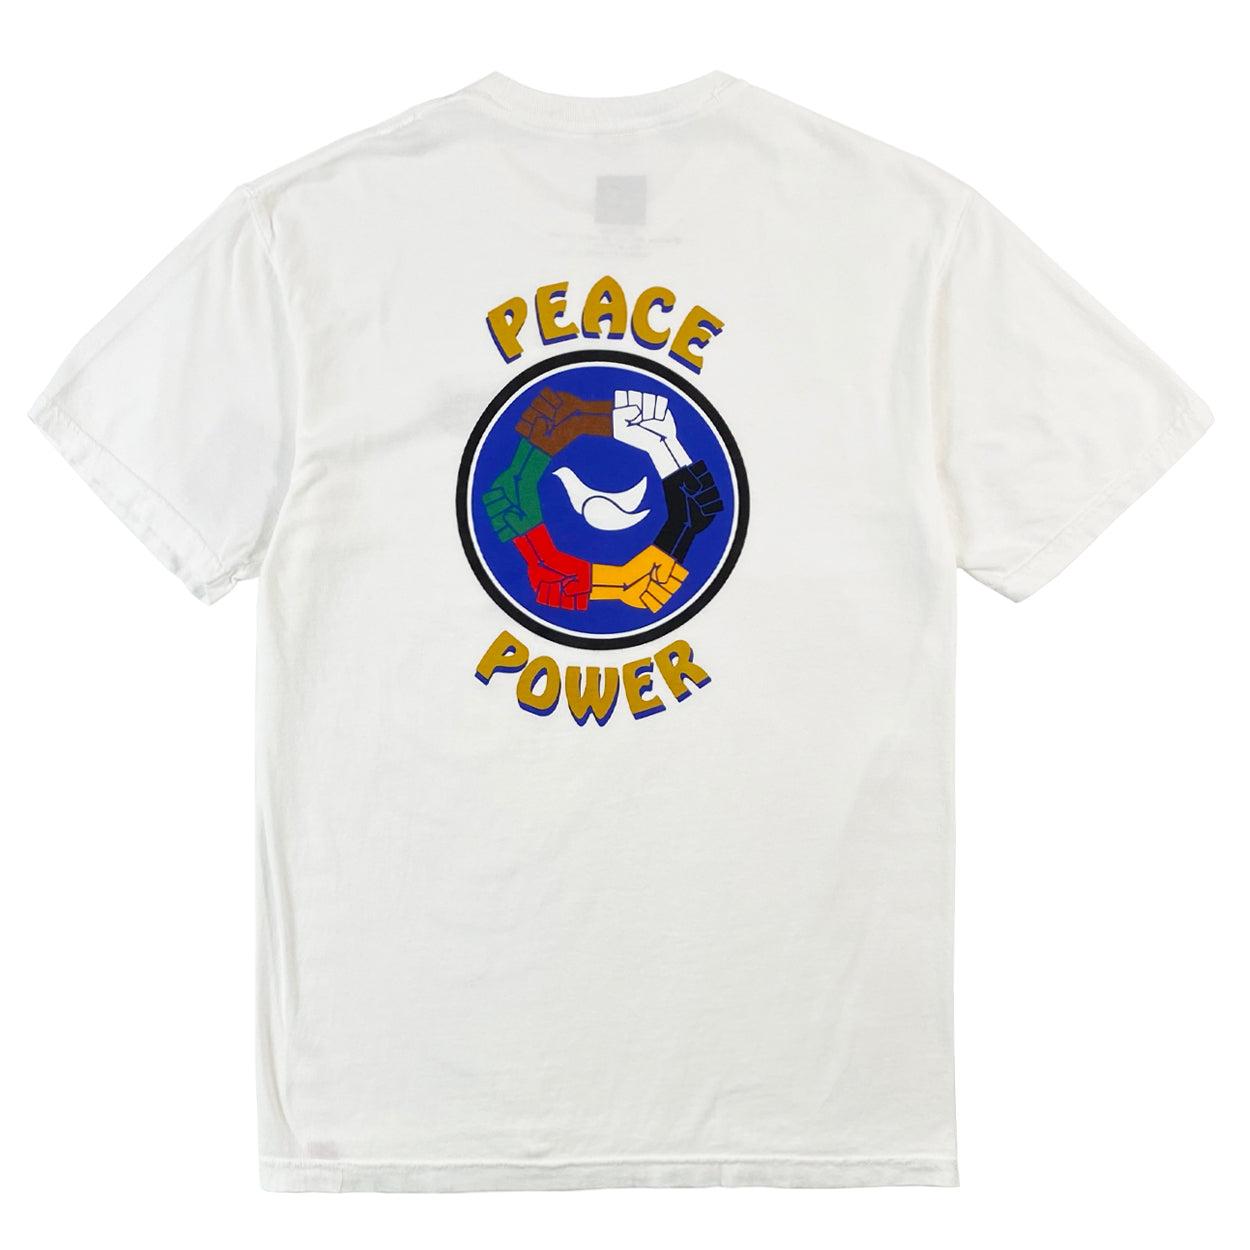 Chocolate Skateboards Peace Power T-Shirt - White - Prime Delux Store